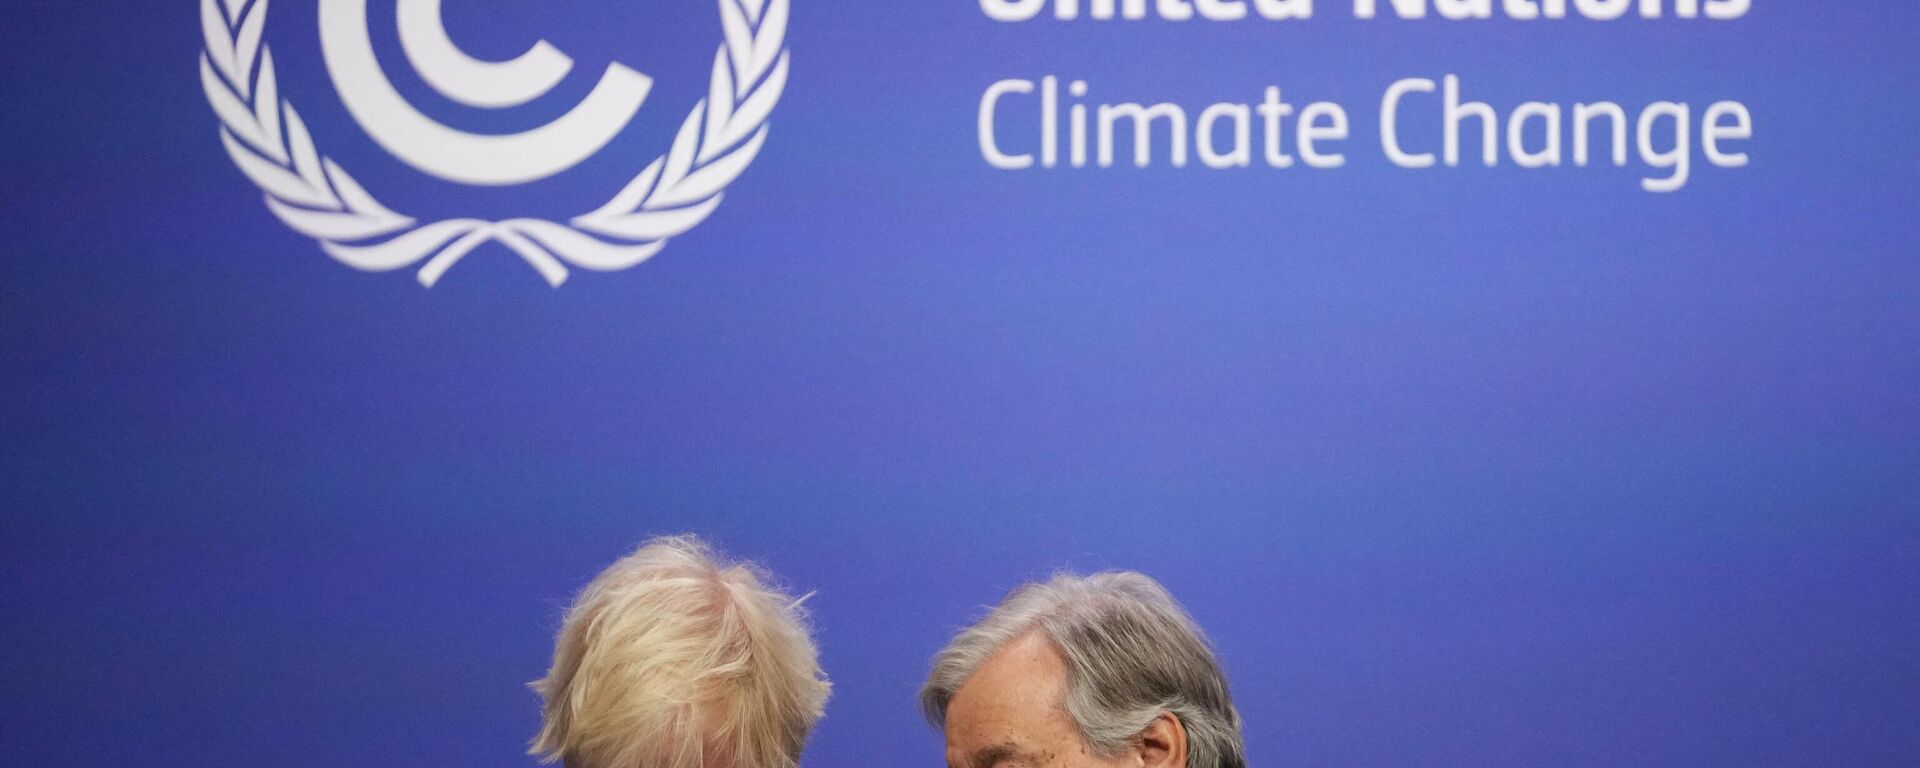 Britain's Prime Minister Boris Johnson (L) talks with United Nations (UN) Secretary General Antonio Guterres as they wait to greet leaders at the COP26 UN Climate Change Conference in Glasgow, Scotland on November 1, 2021. - Sputnik International, 1920, 02.11.2021